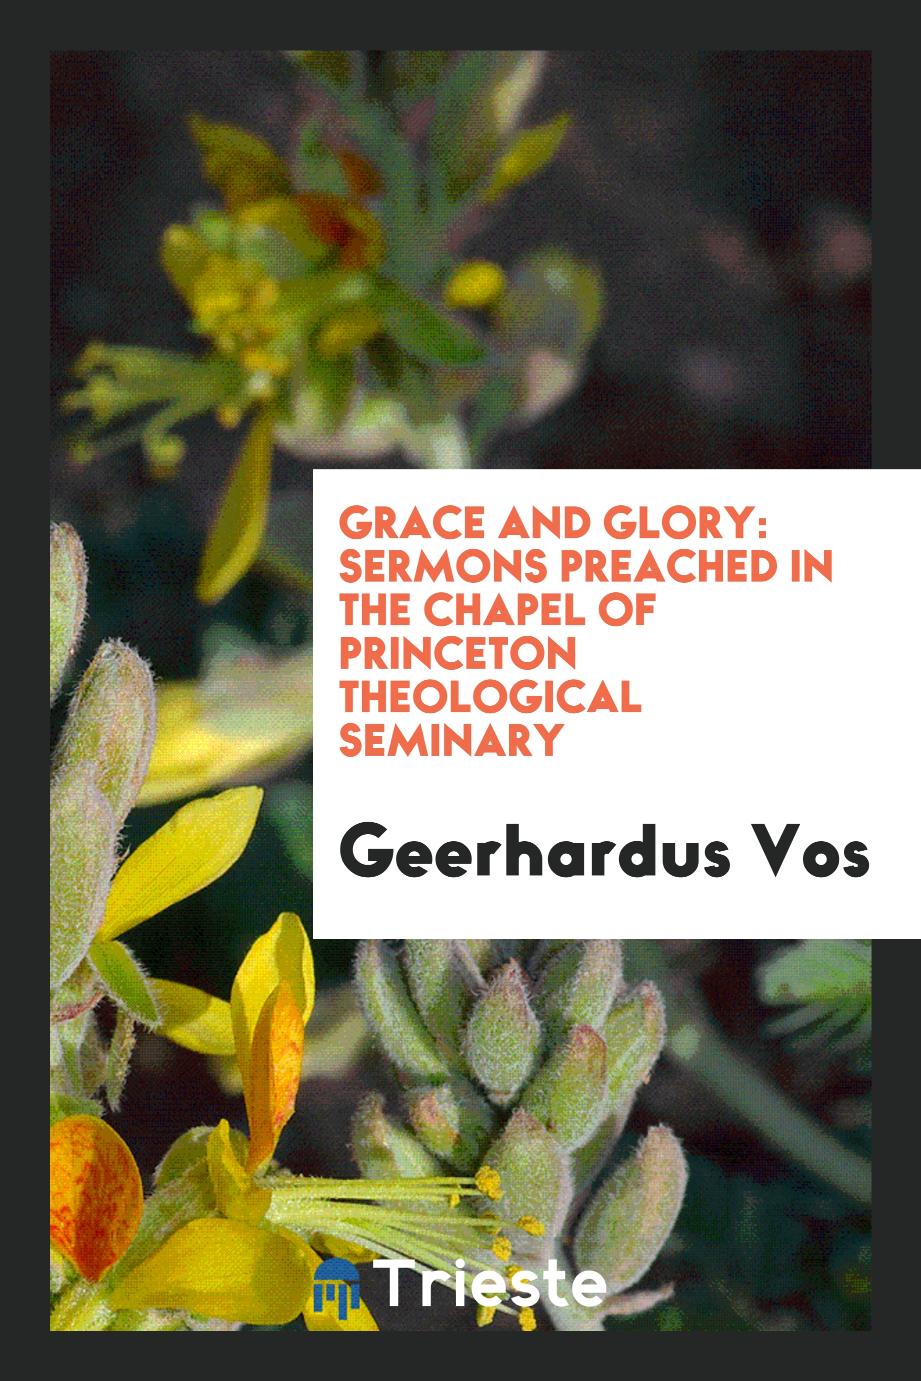 Grace and glory: sermons preached in the chapel of Princeton Theological Seminary